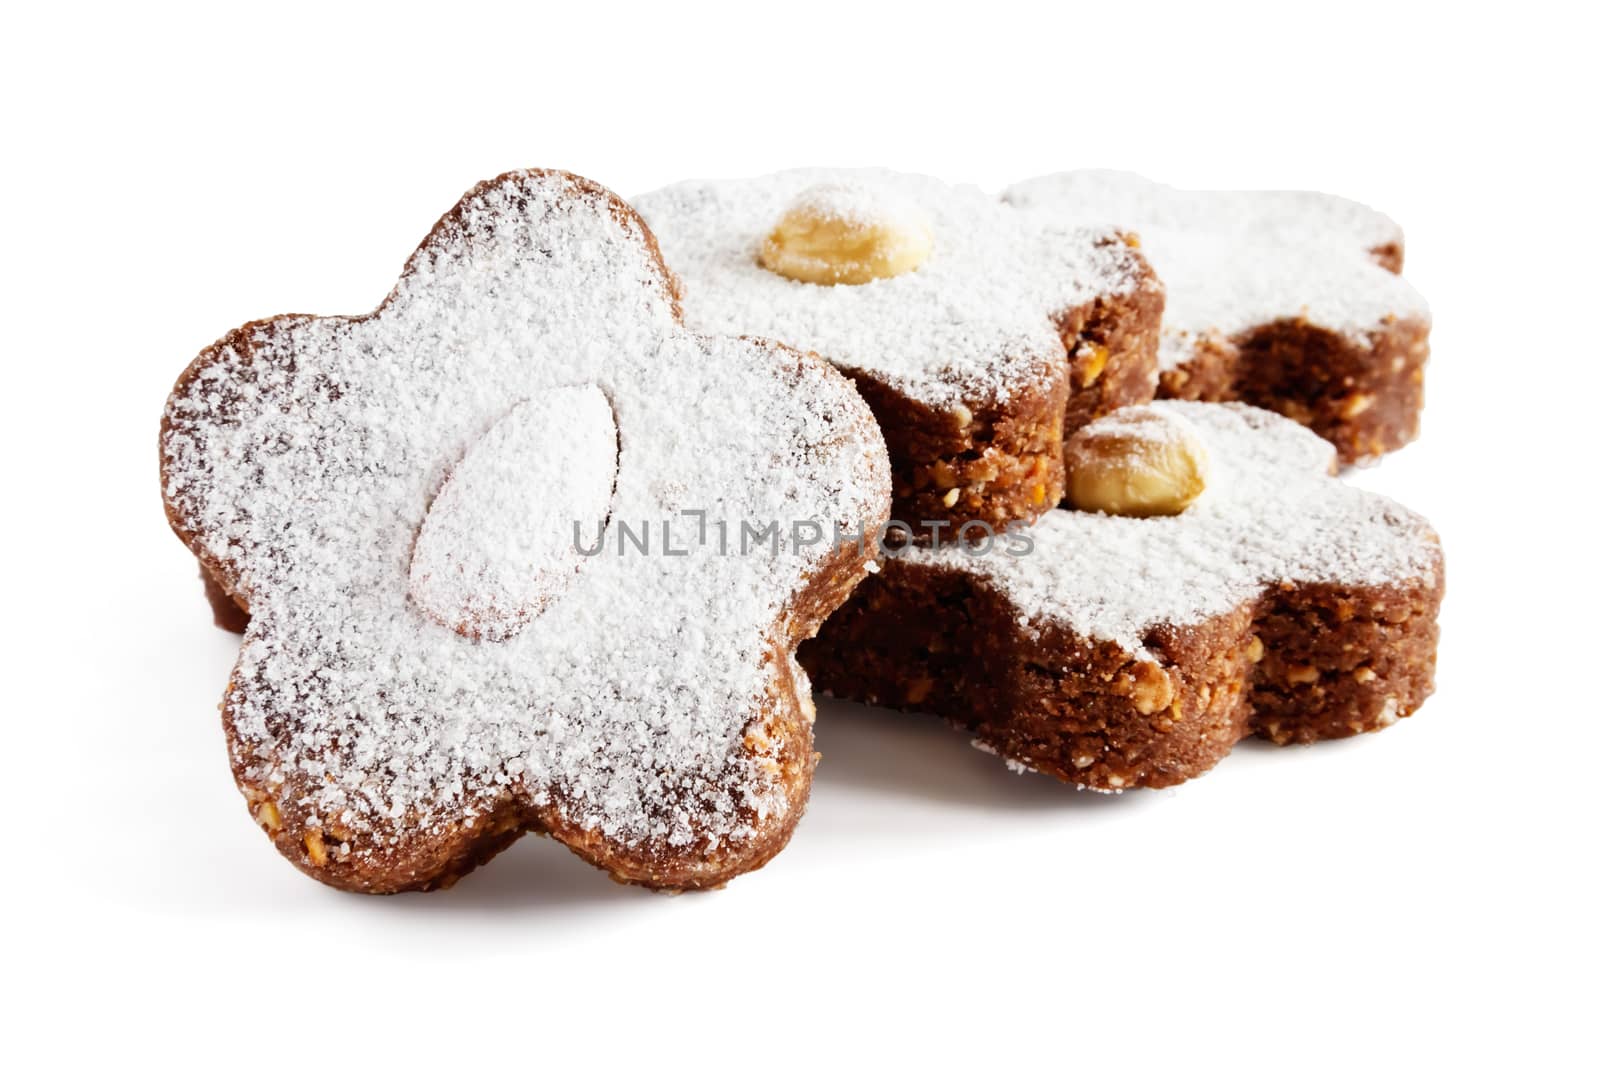 Chocolate cakes with nuts and powdered sugar on a white background